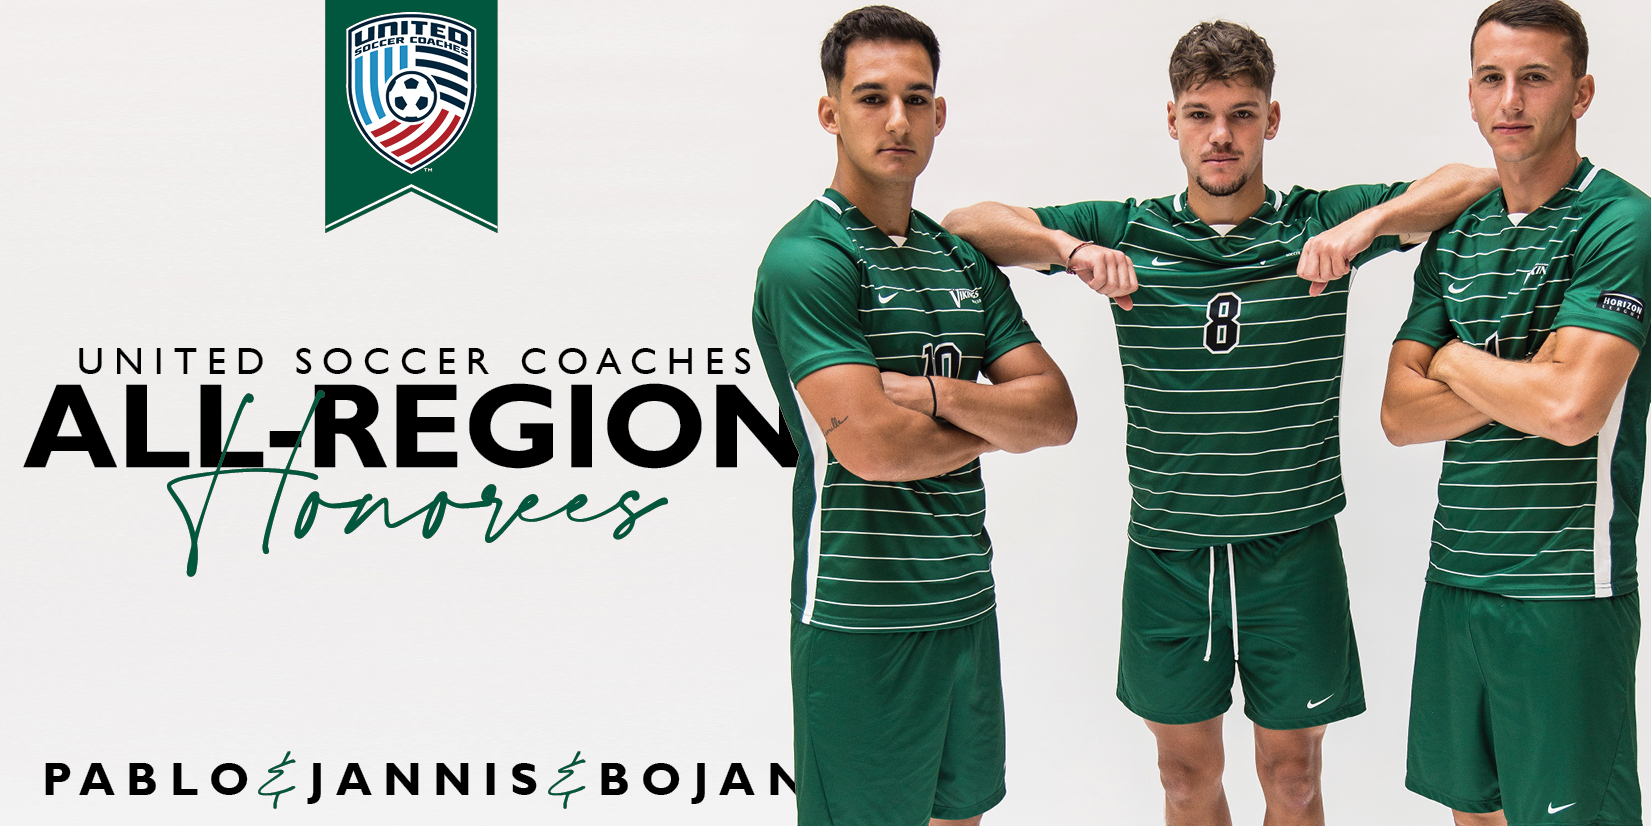 Cleveland State Men's Soccer Collects Three All-Region Awards